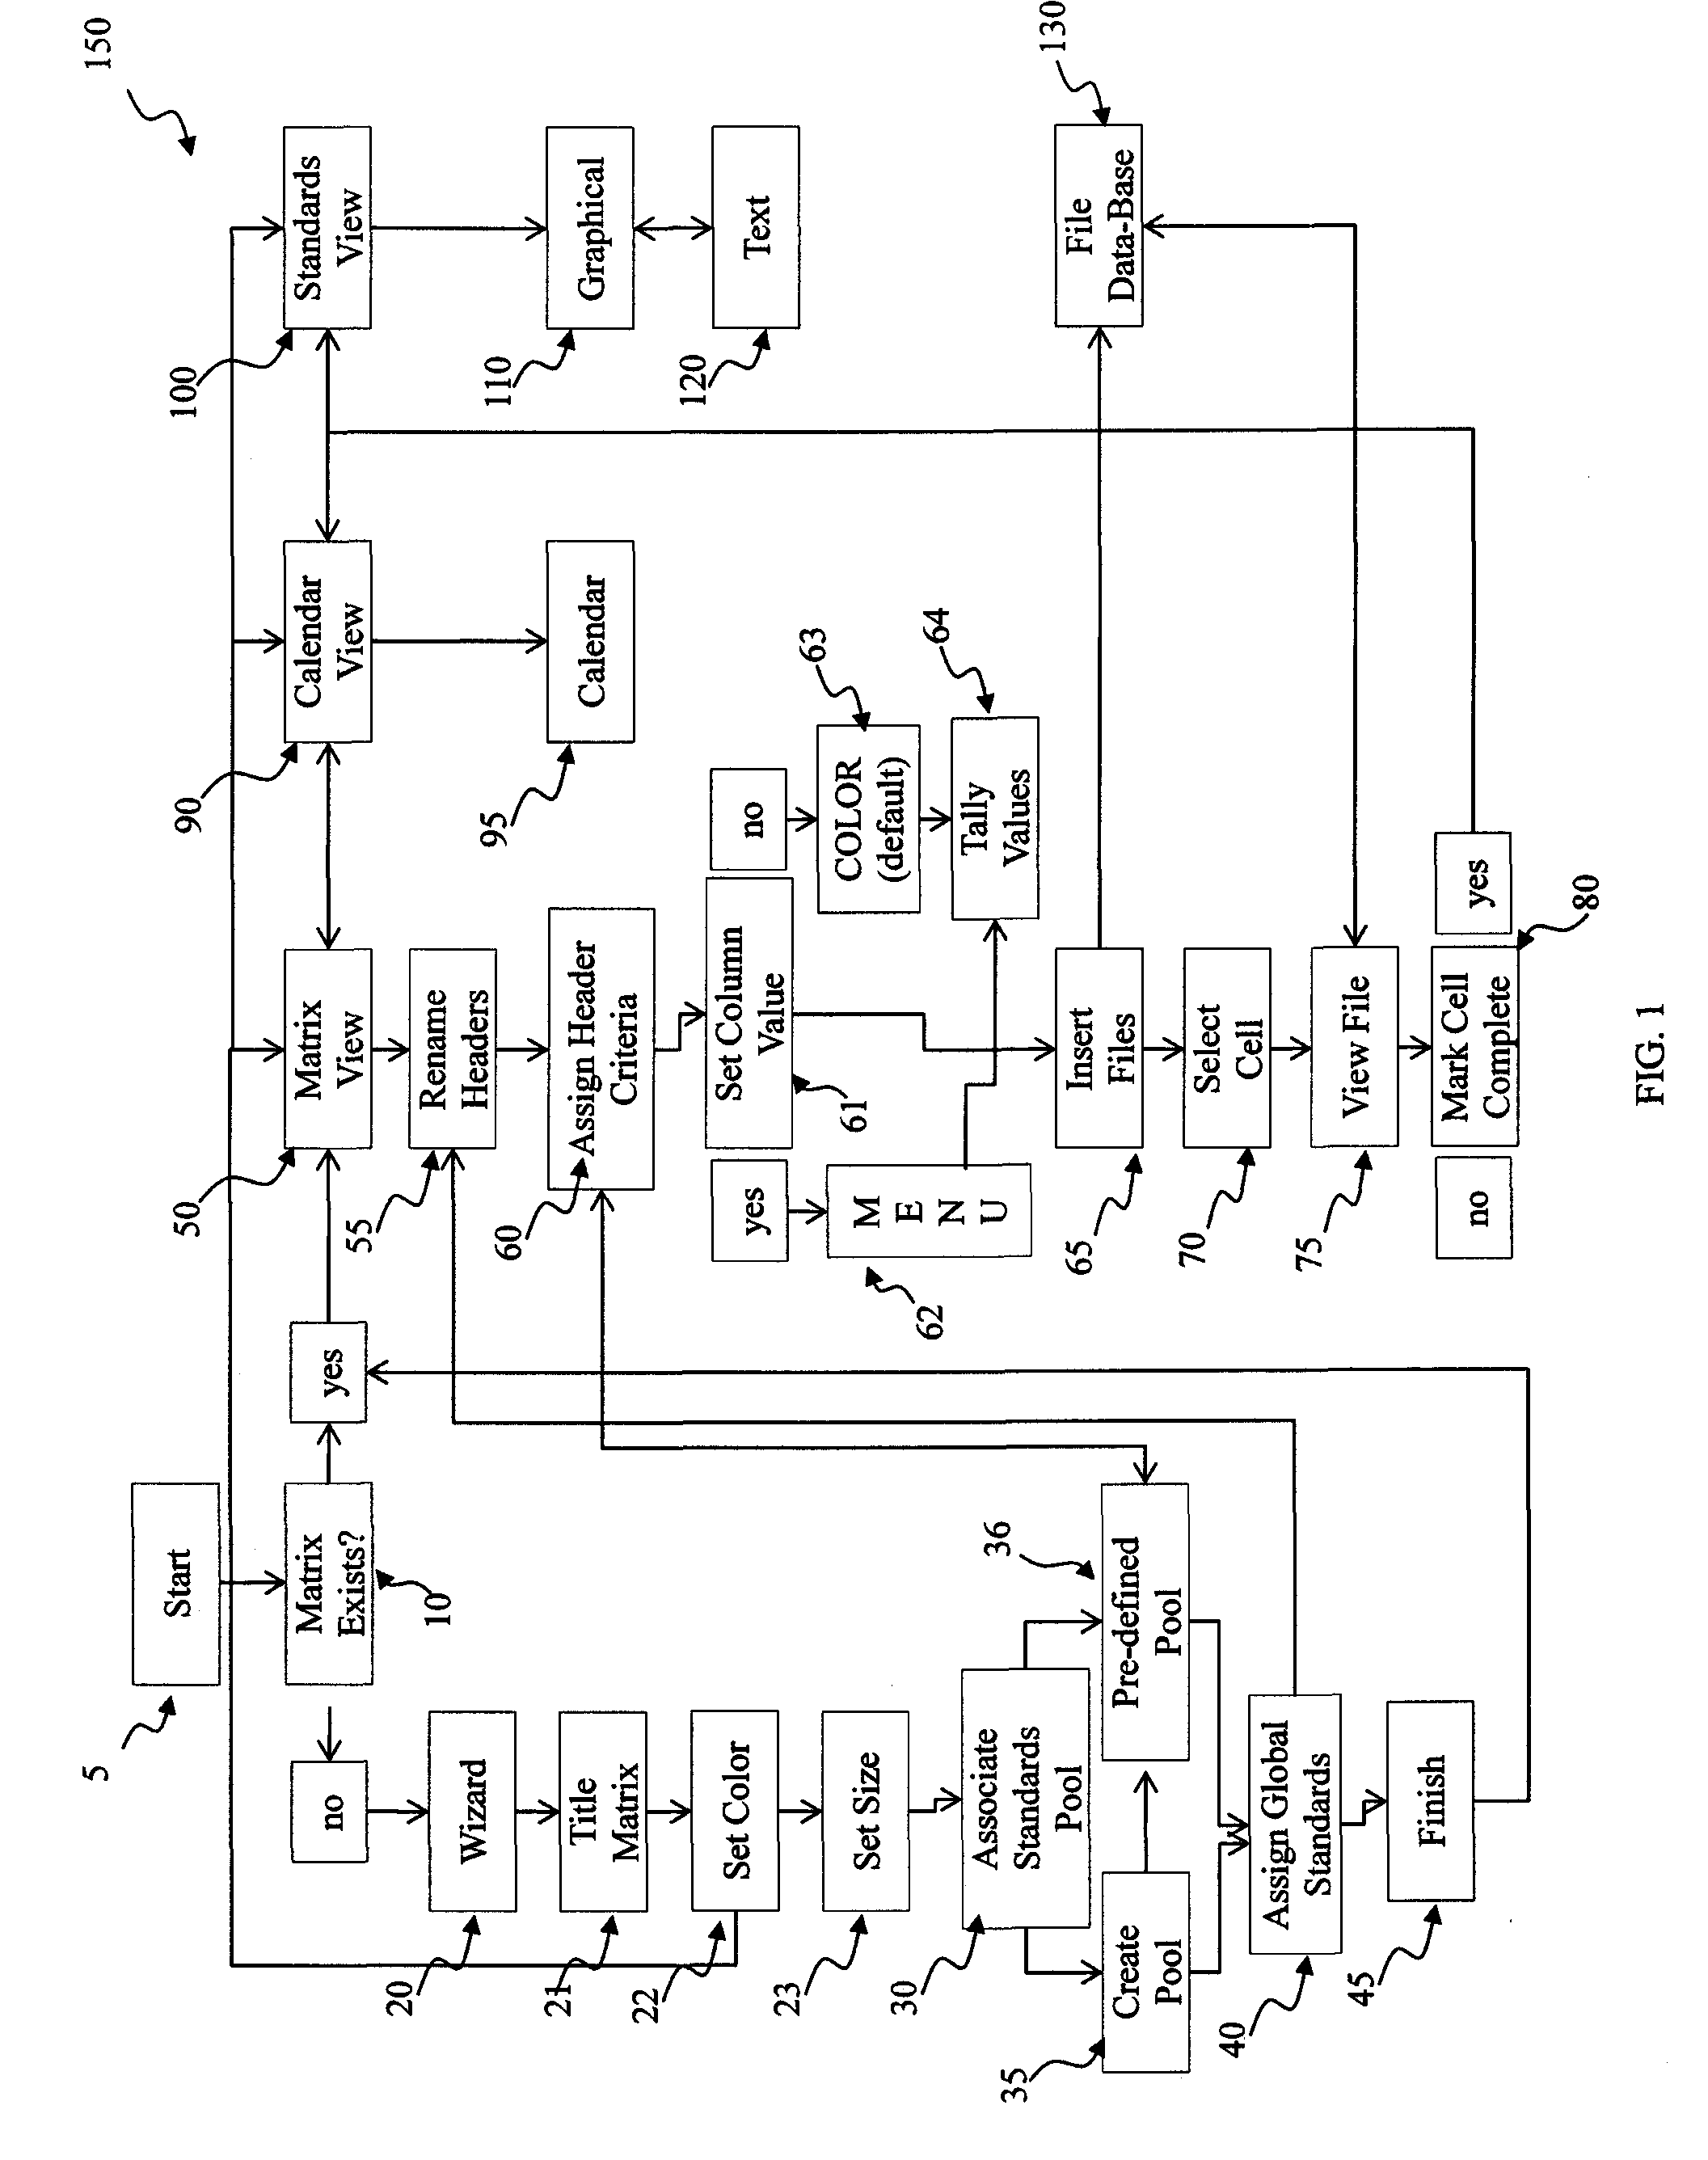 System and Method for Organizing, Managing, and Using Electronic Files